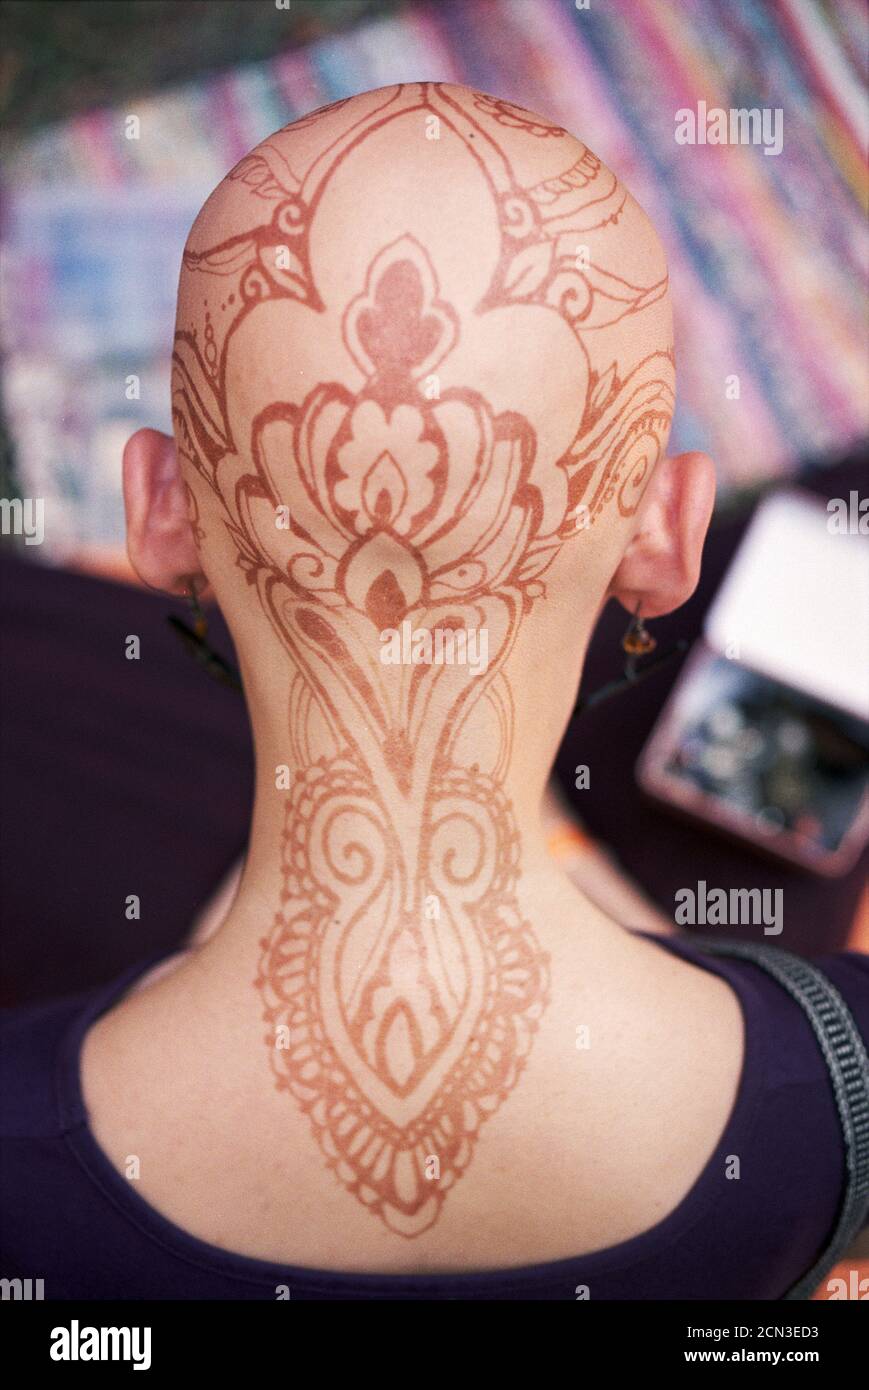 Krishna's flute, feather a hit among Delhi's tattoo lovers | Delhi News -  Times of India